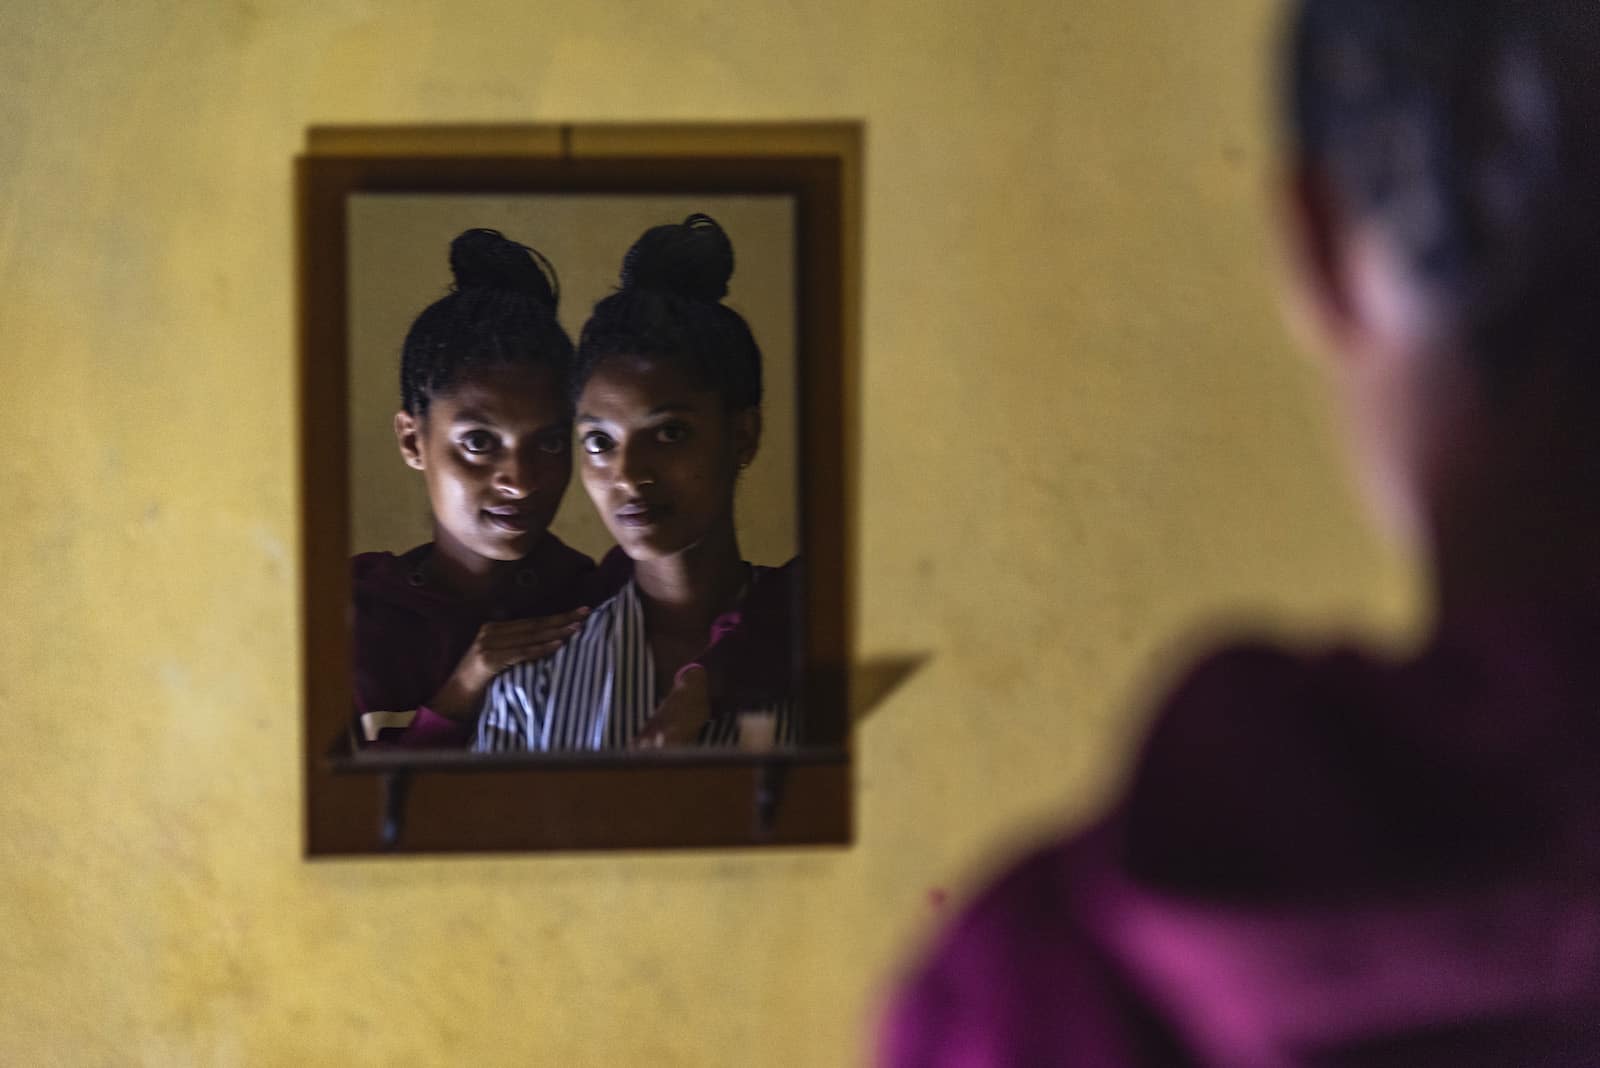 An orphan story: The mirror reflection of two teenage girls looking in the mirror.